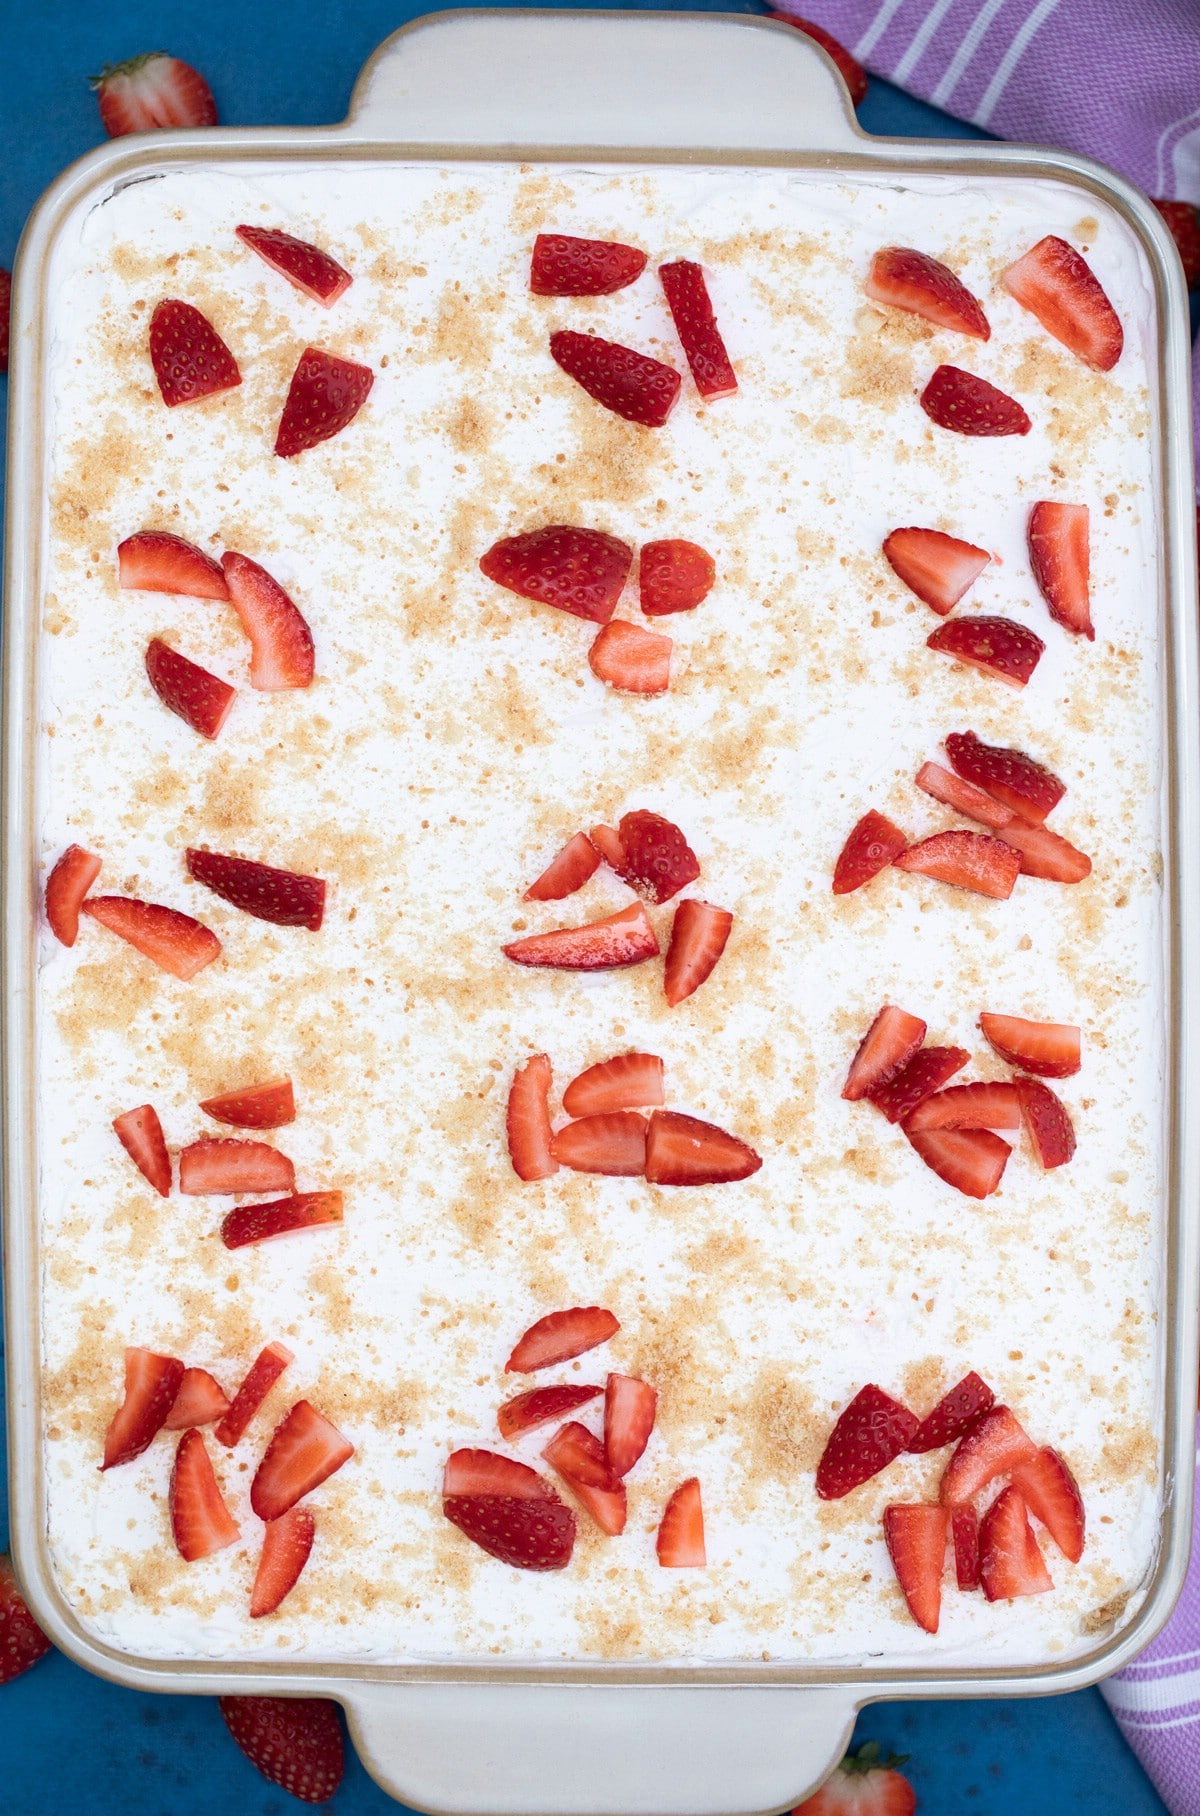 Overhead of dessert in baking dish with strawberries on top